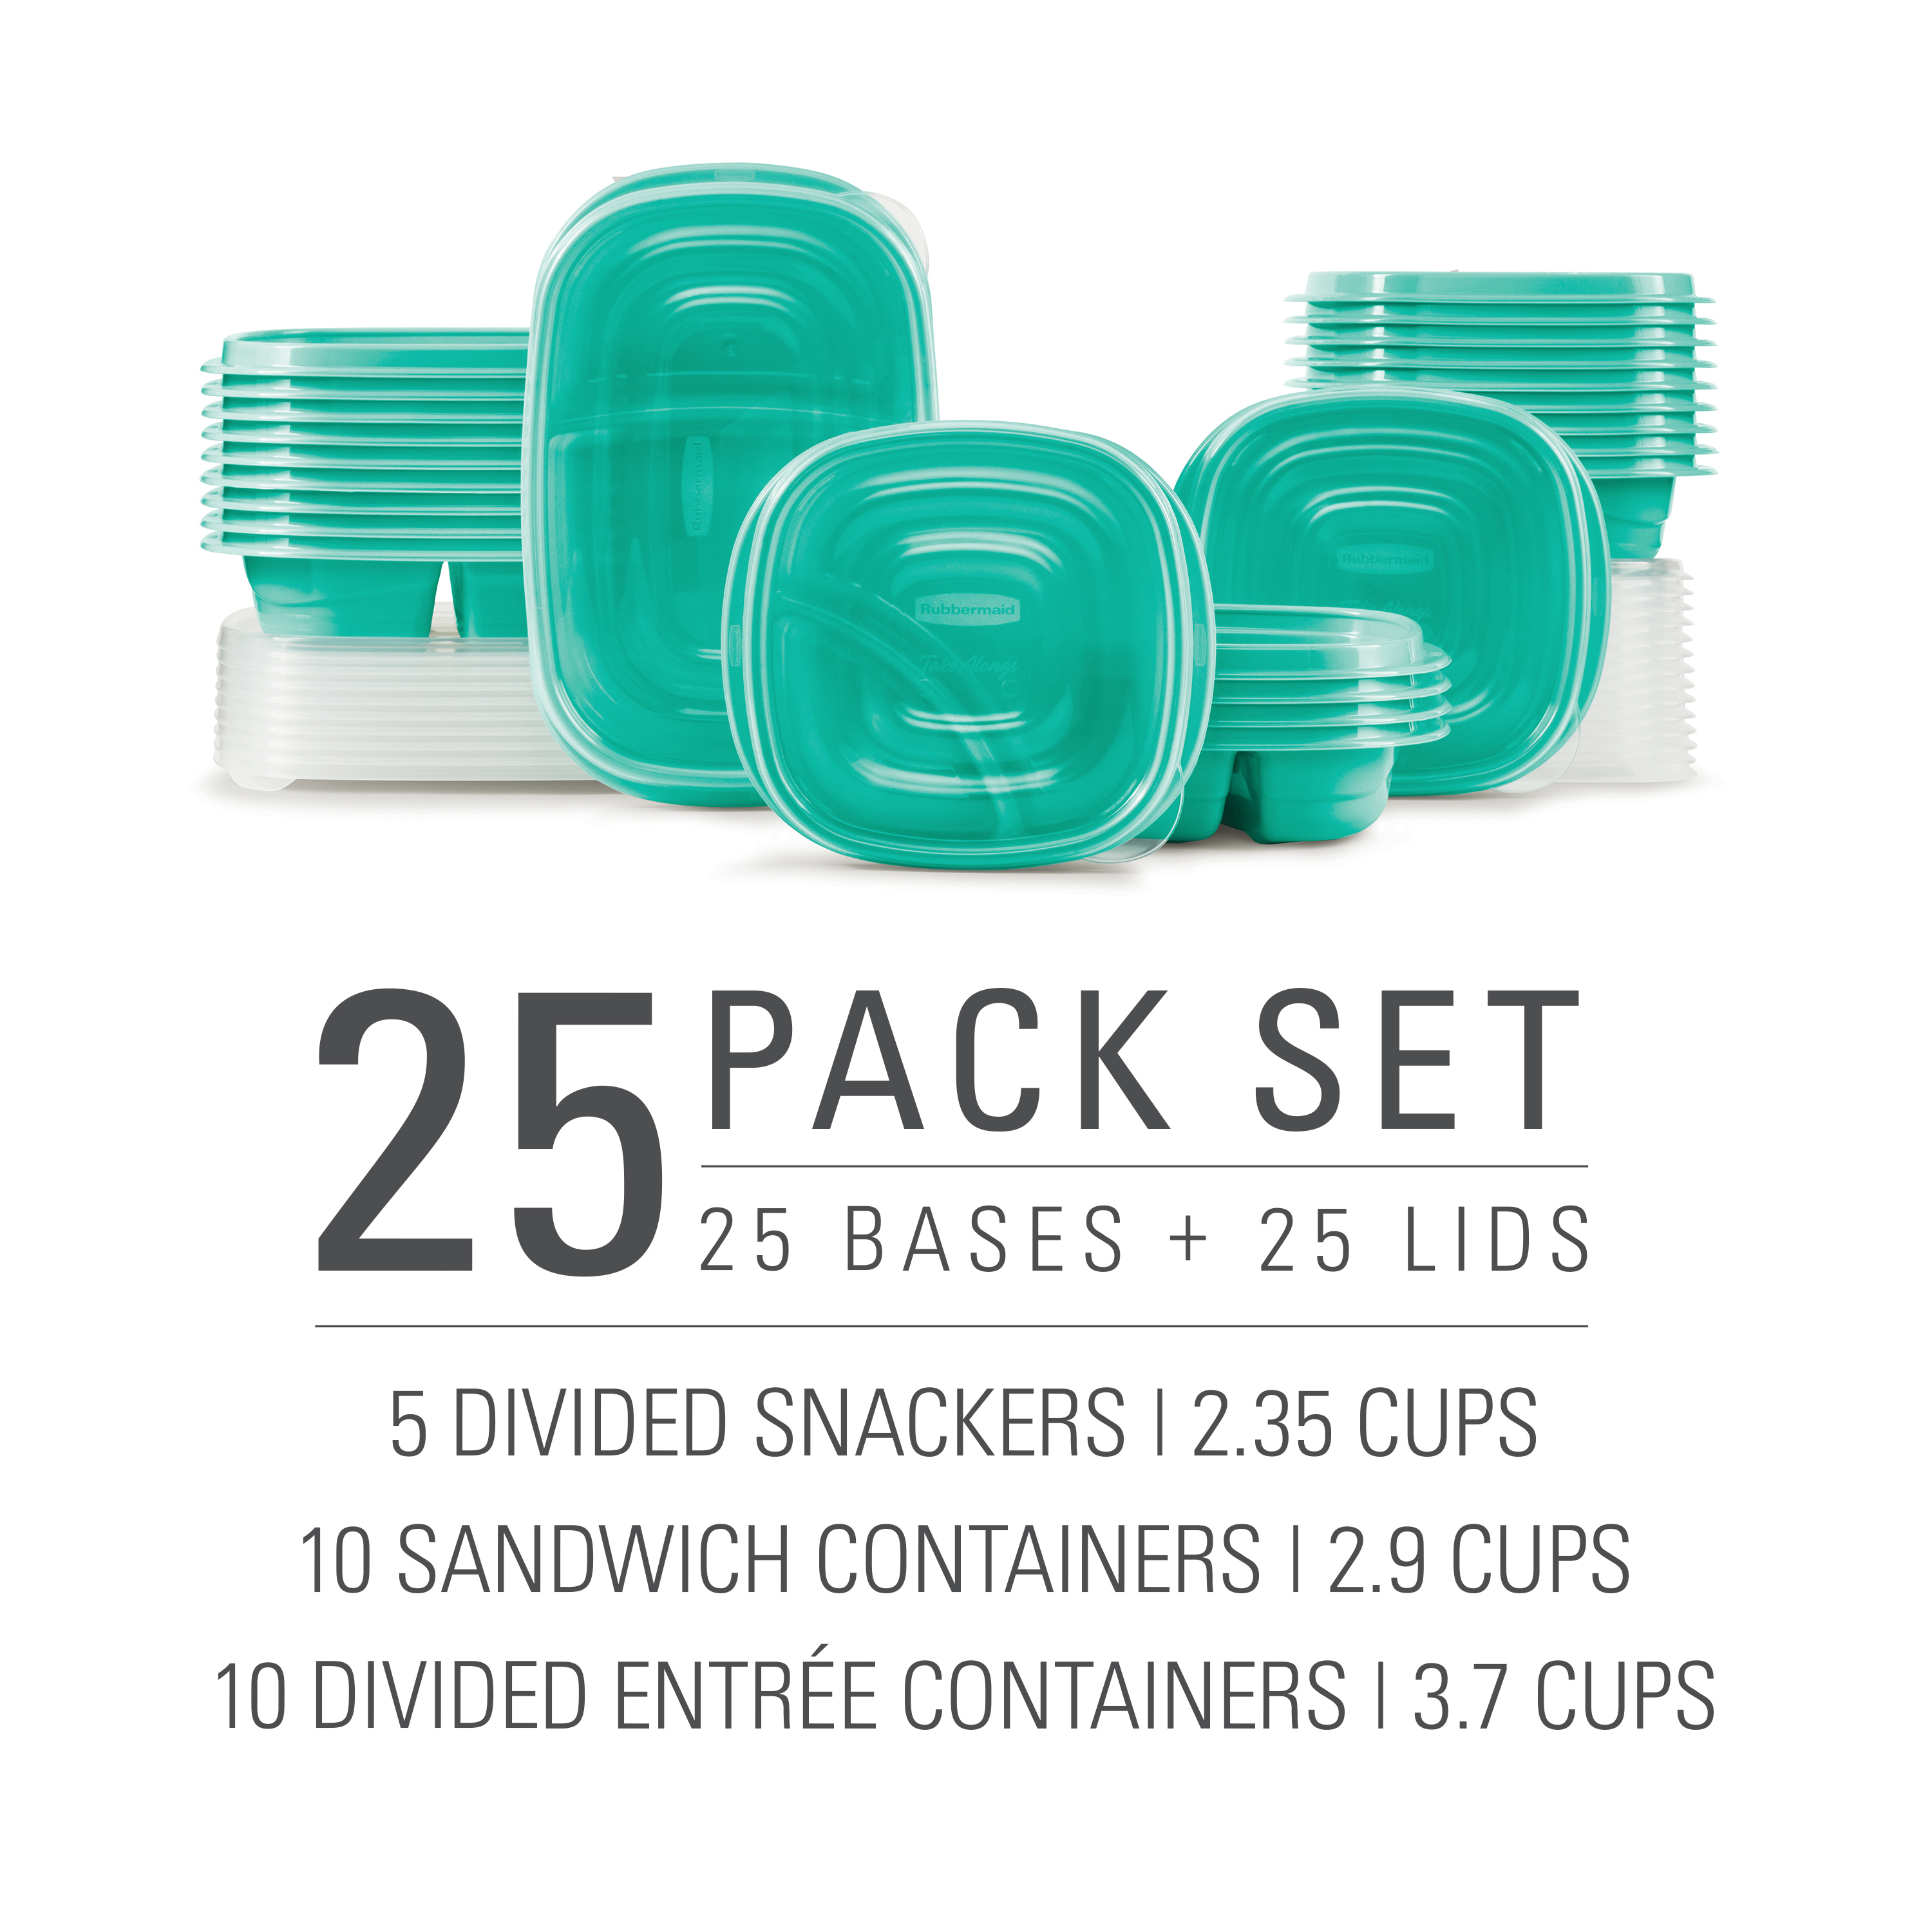 Rubbermaid TakeAlongs Variety Set of 25 Food Storage Containers, Teal Lids - image 3 of 6